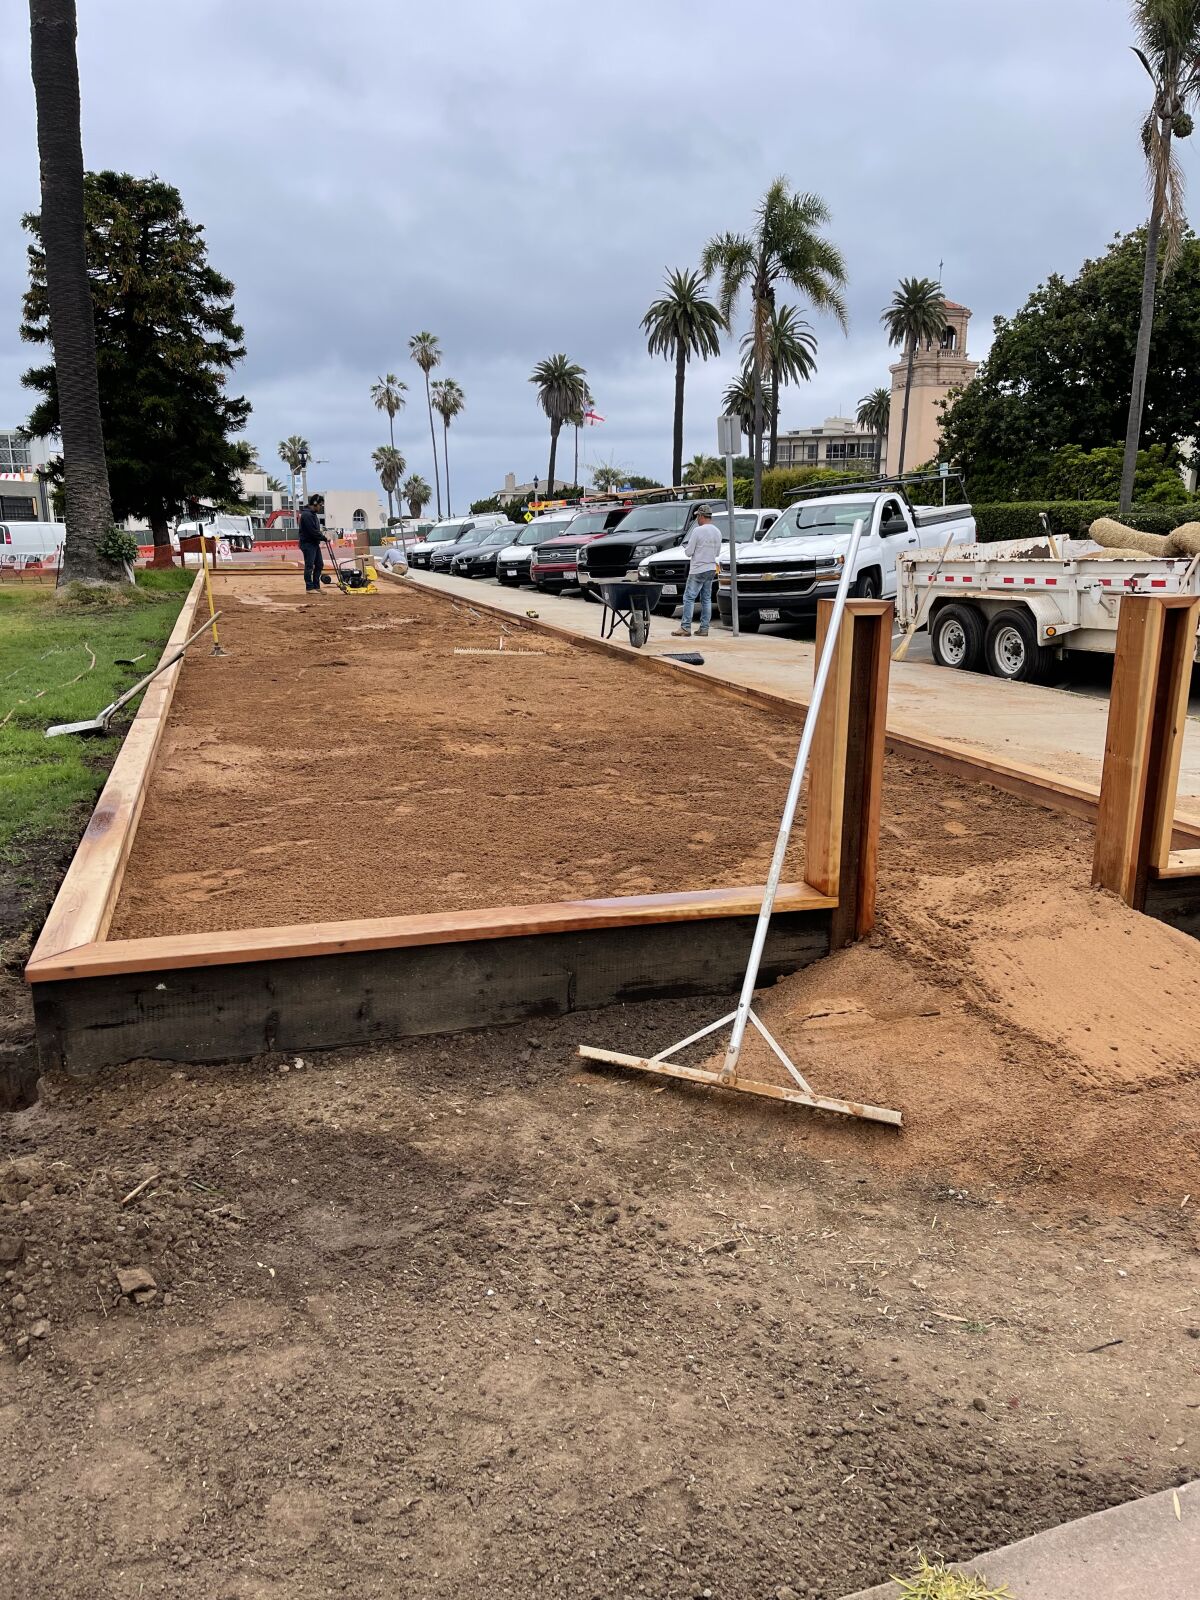 The La Jolla Recreation Center's new temporary bocce court is pictured under construction June 24.